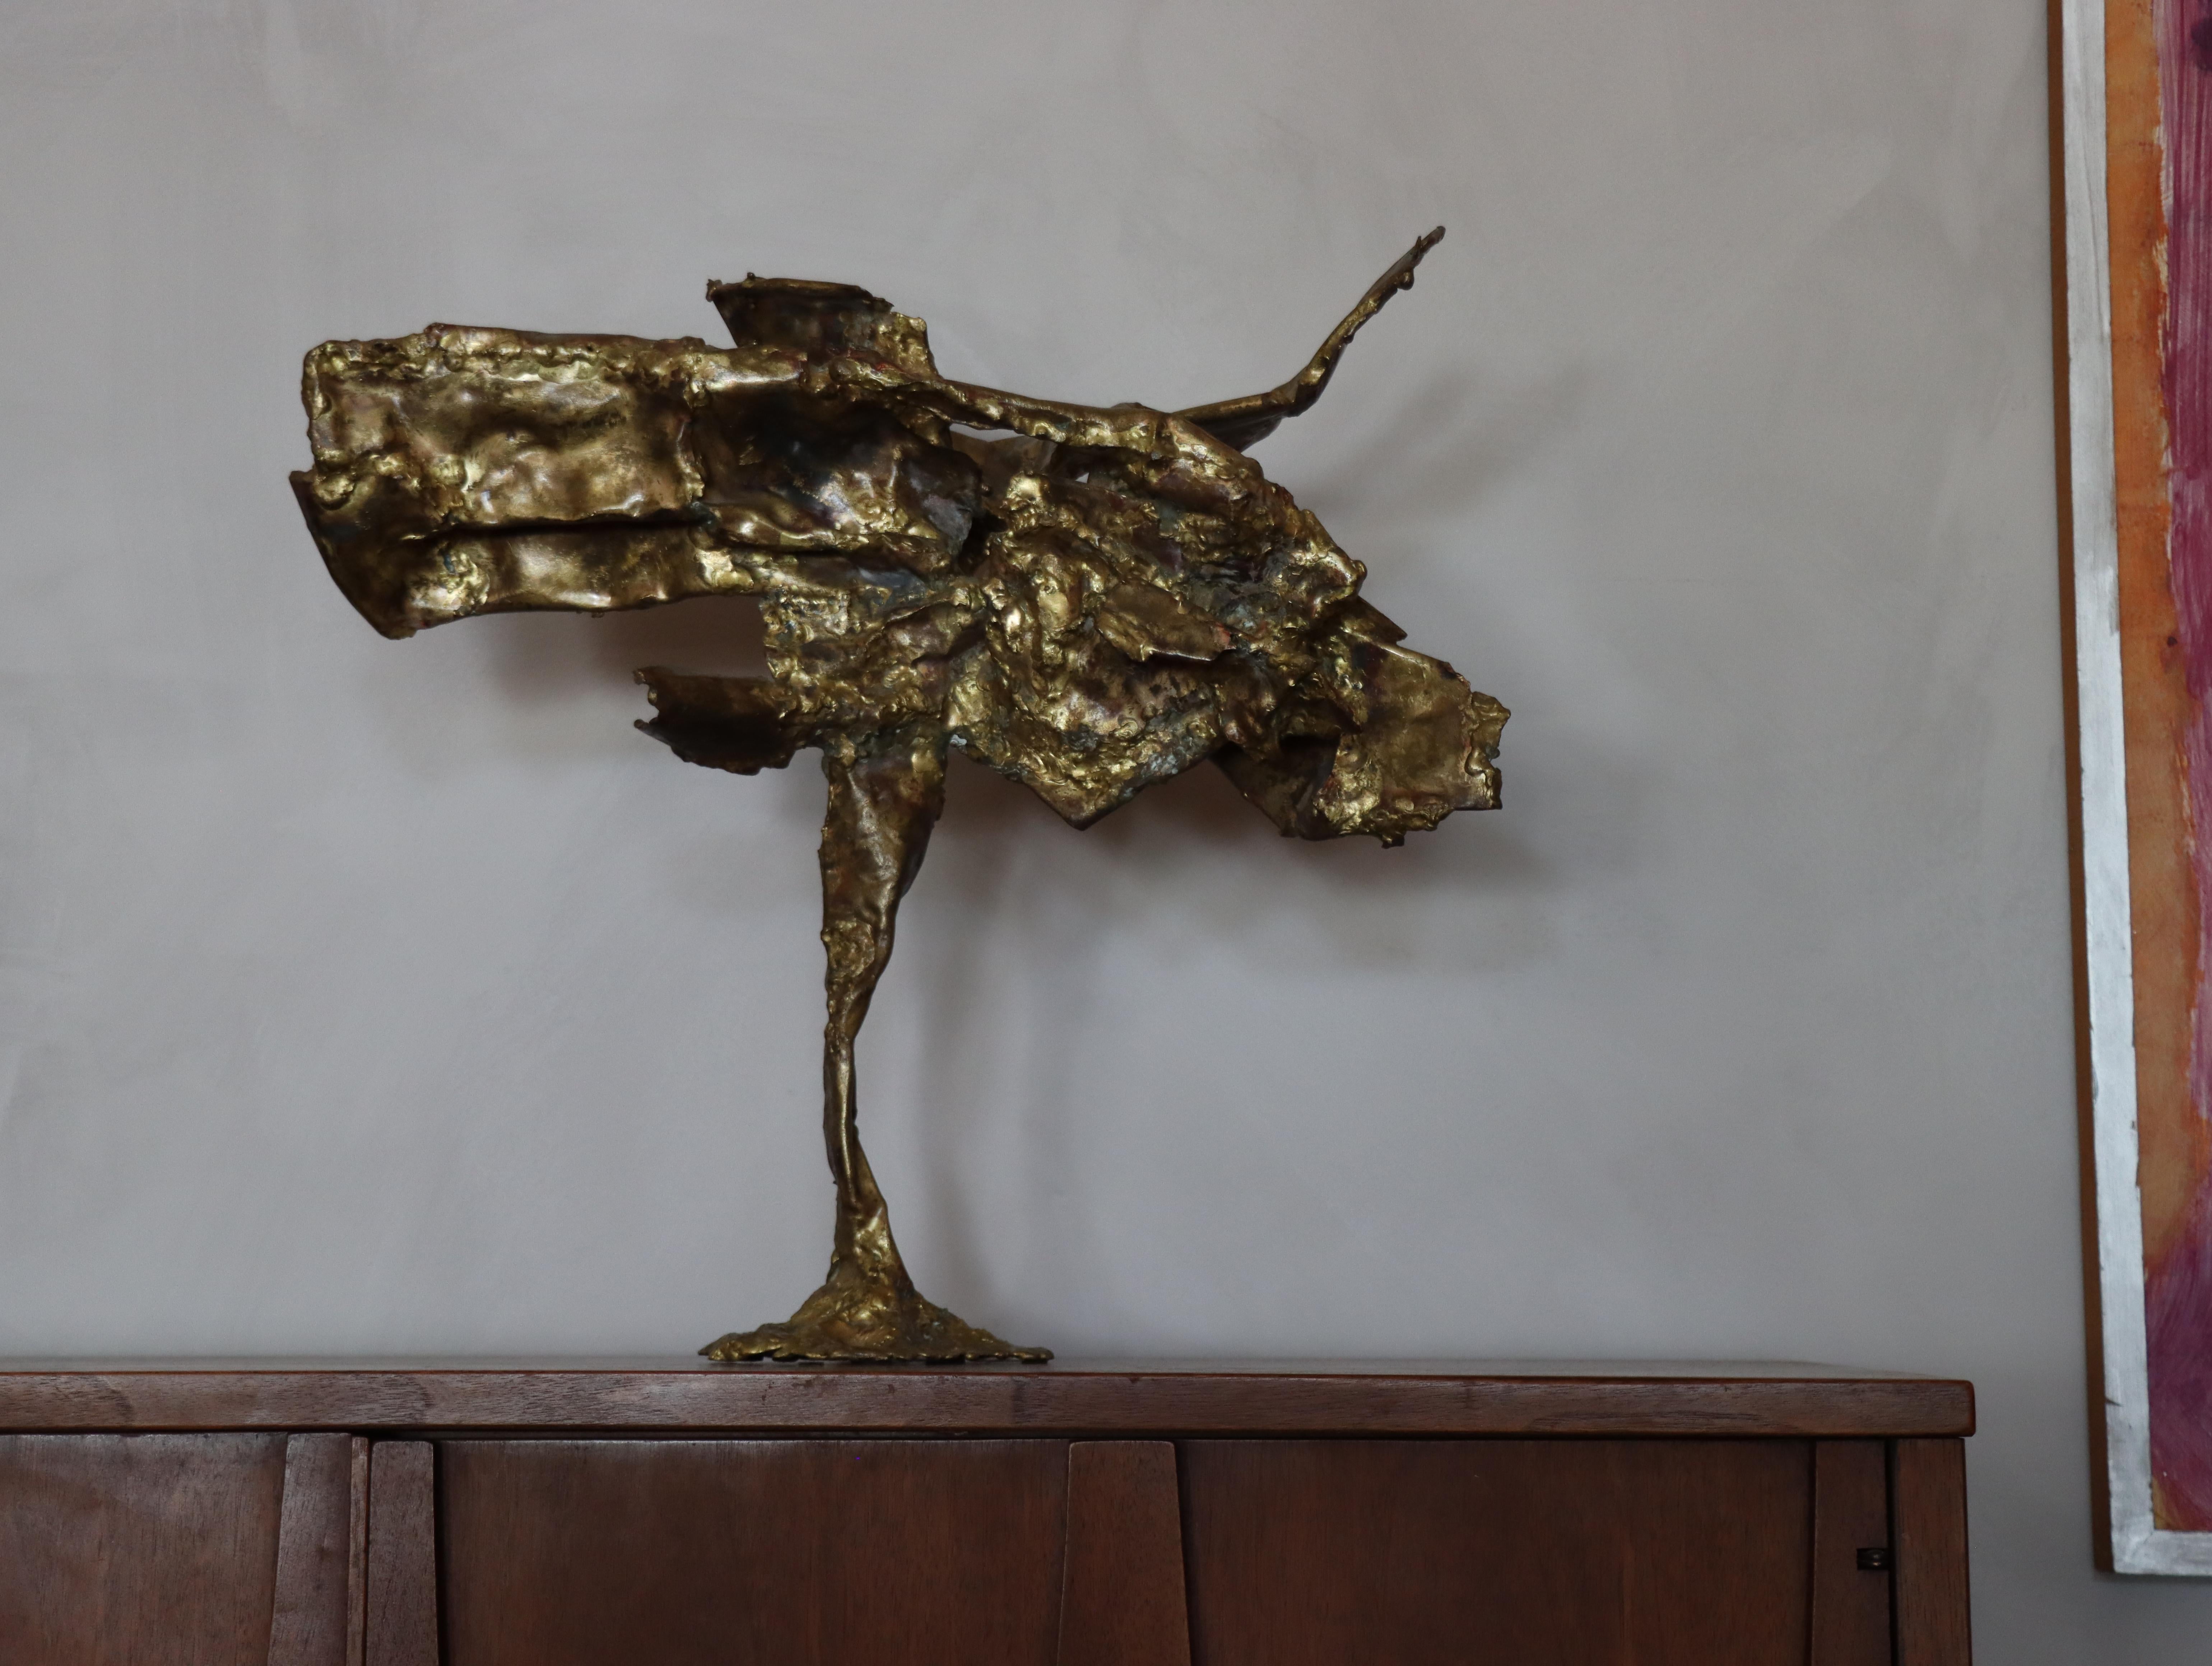 Beautiful and early “bonsai” table top sculpture by Silas Seandel. This rare work is made entirely from bronze and shows Seandel’s early studio aesthetic. 
A lovely mixture of a delicate stem with well proportioned upper form makes this a stand out